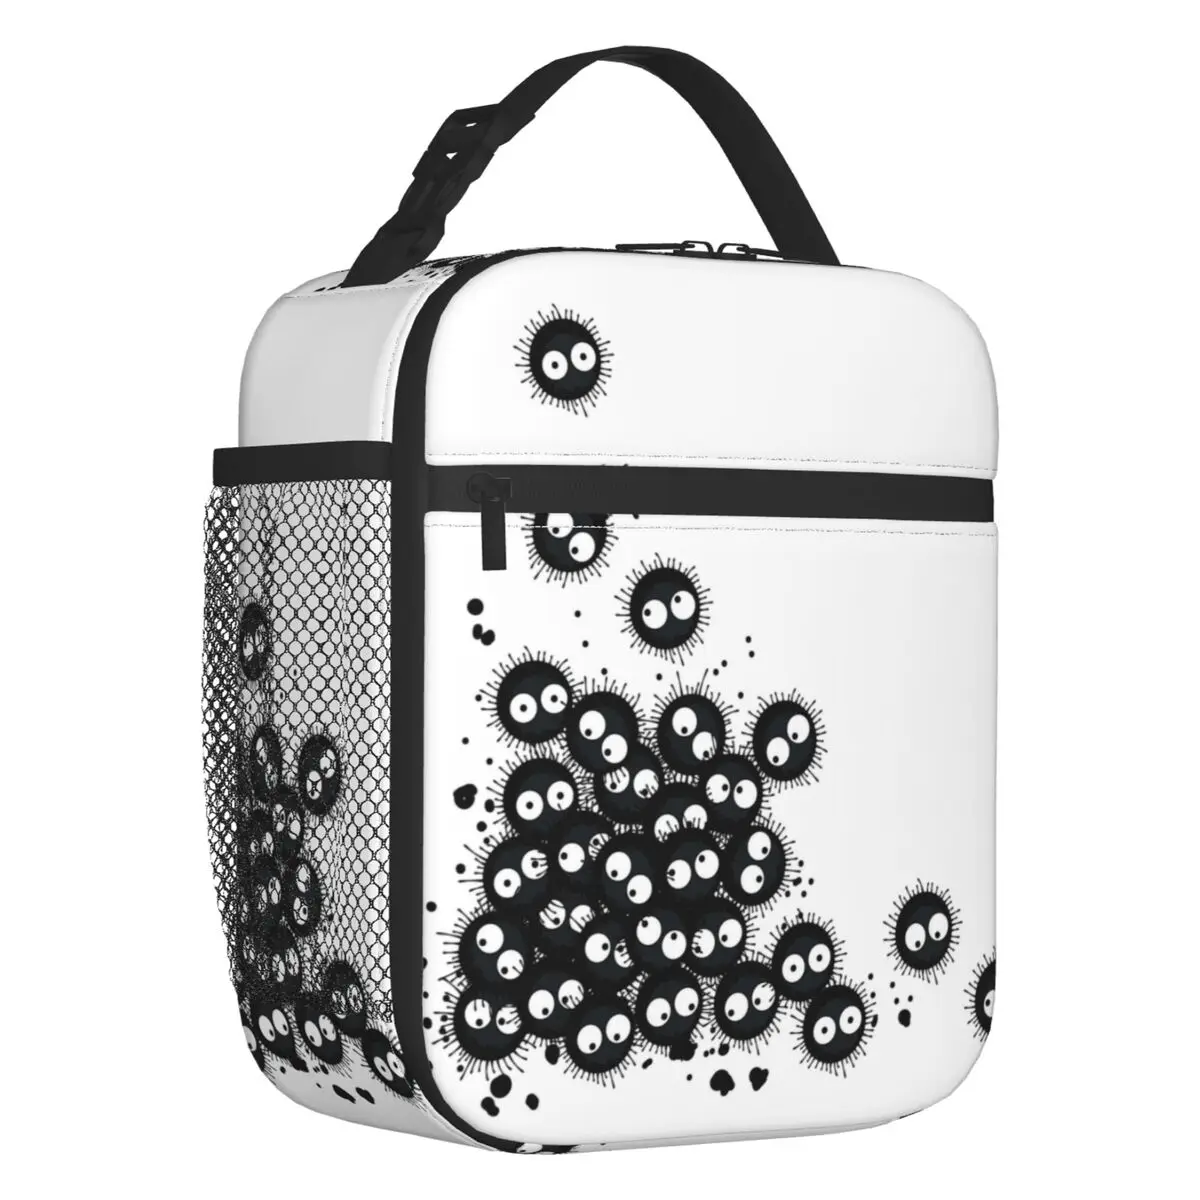 Dust Soot Sprites Balls Portable Lunch Boxes Funny Cartoon Totoro Ghibli Cooler Thermal Food Insulated Lunch Bag Kids School